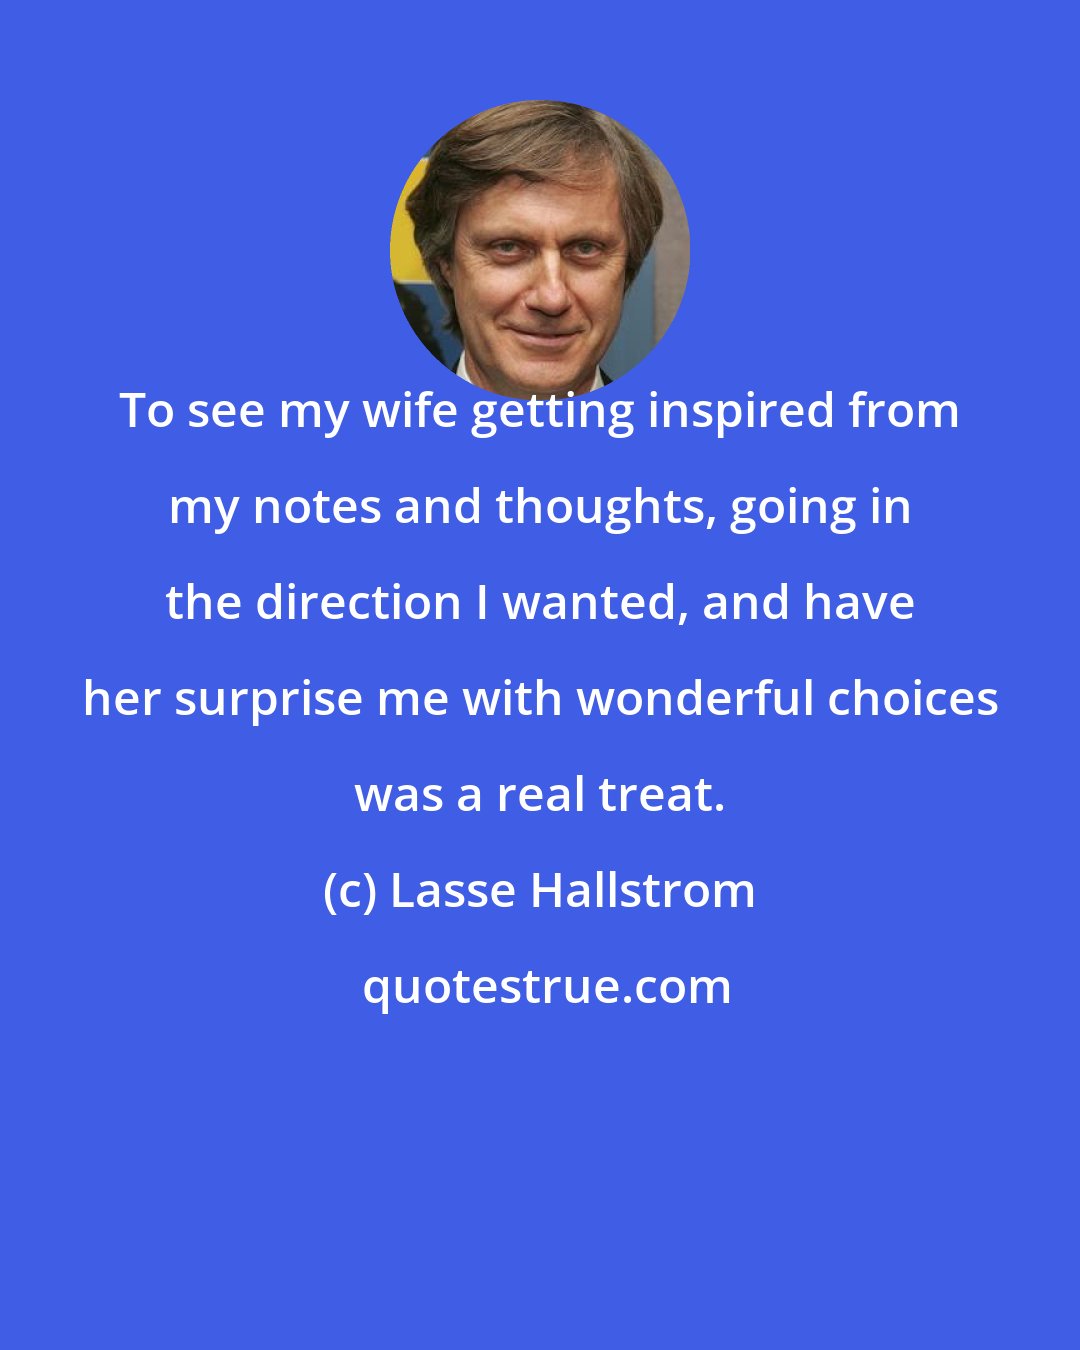 Lasse Hallstrom: To see my wife getting inspired from my notes and thoughts, going in the direction I wanted, and have her surprise me with wonderful choices was a real treat.